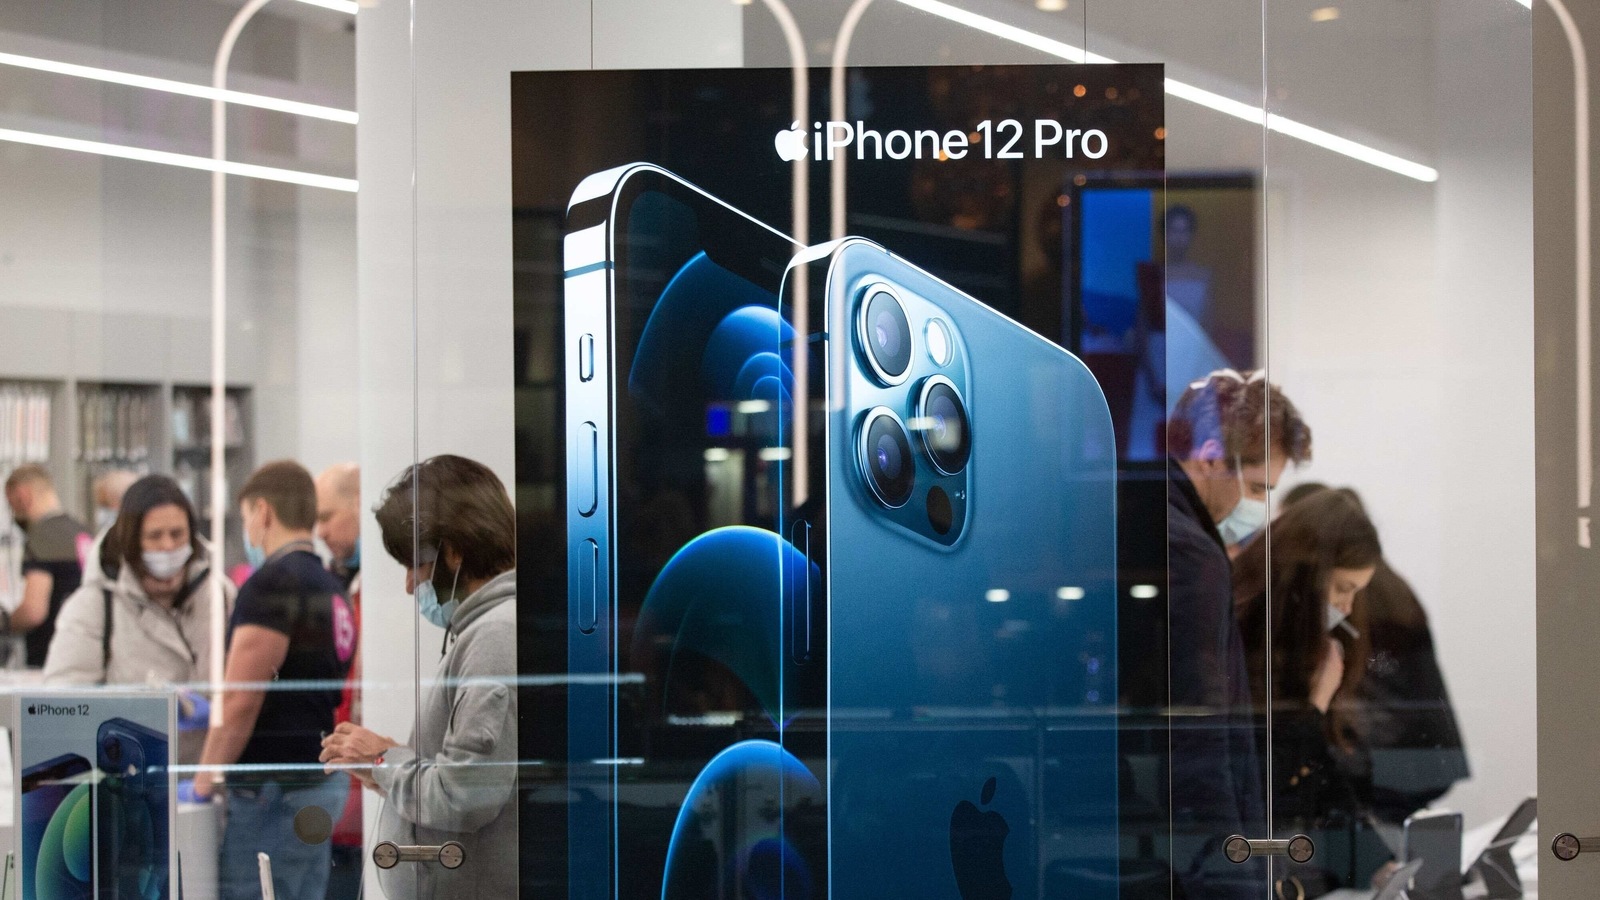 You Can Get The Iphone 12 Pro Iphone 12 For At Least 5 000 Less On Flipkart Ht Tech